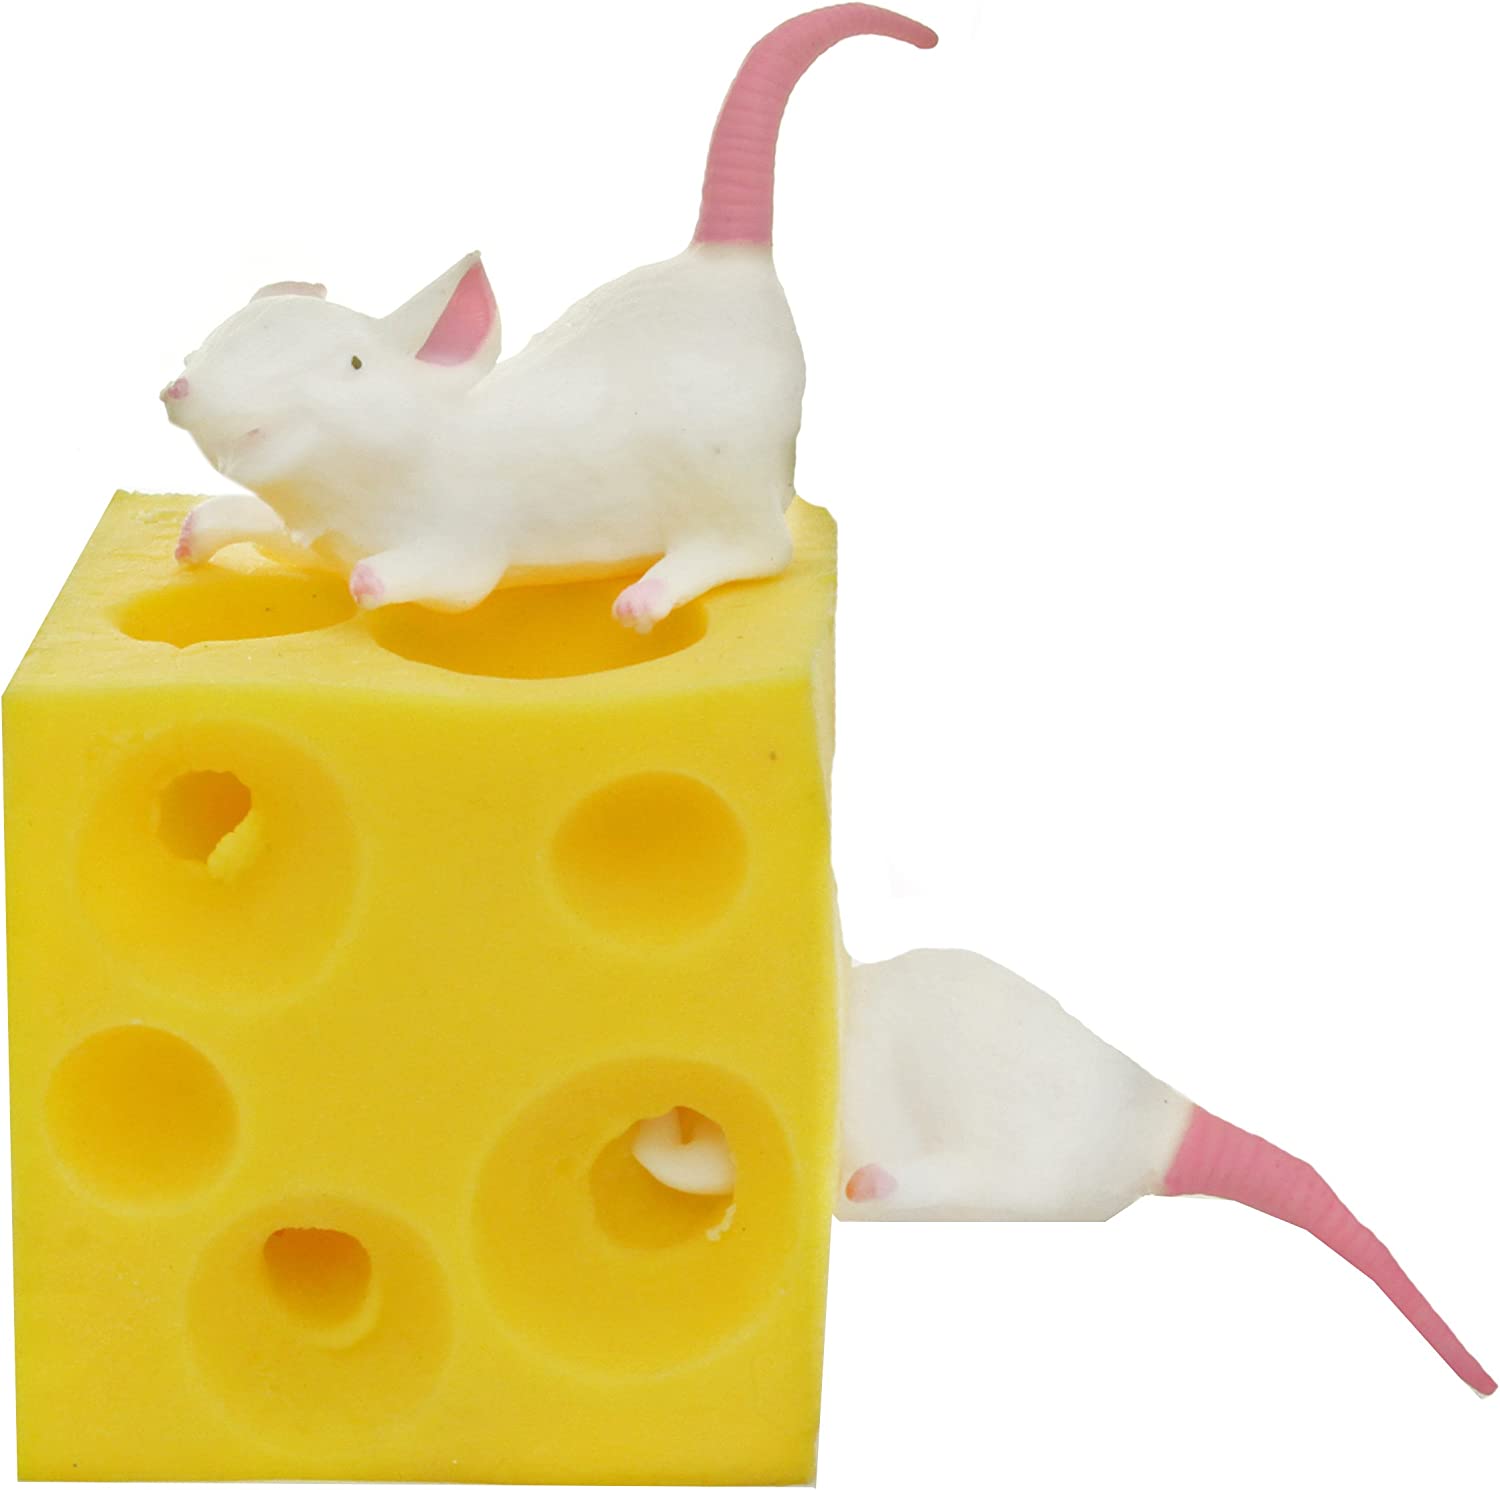 Mouse On Cheese And Rainbow Art Wallpapers